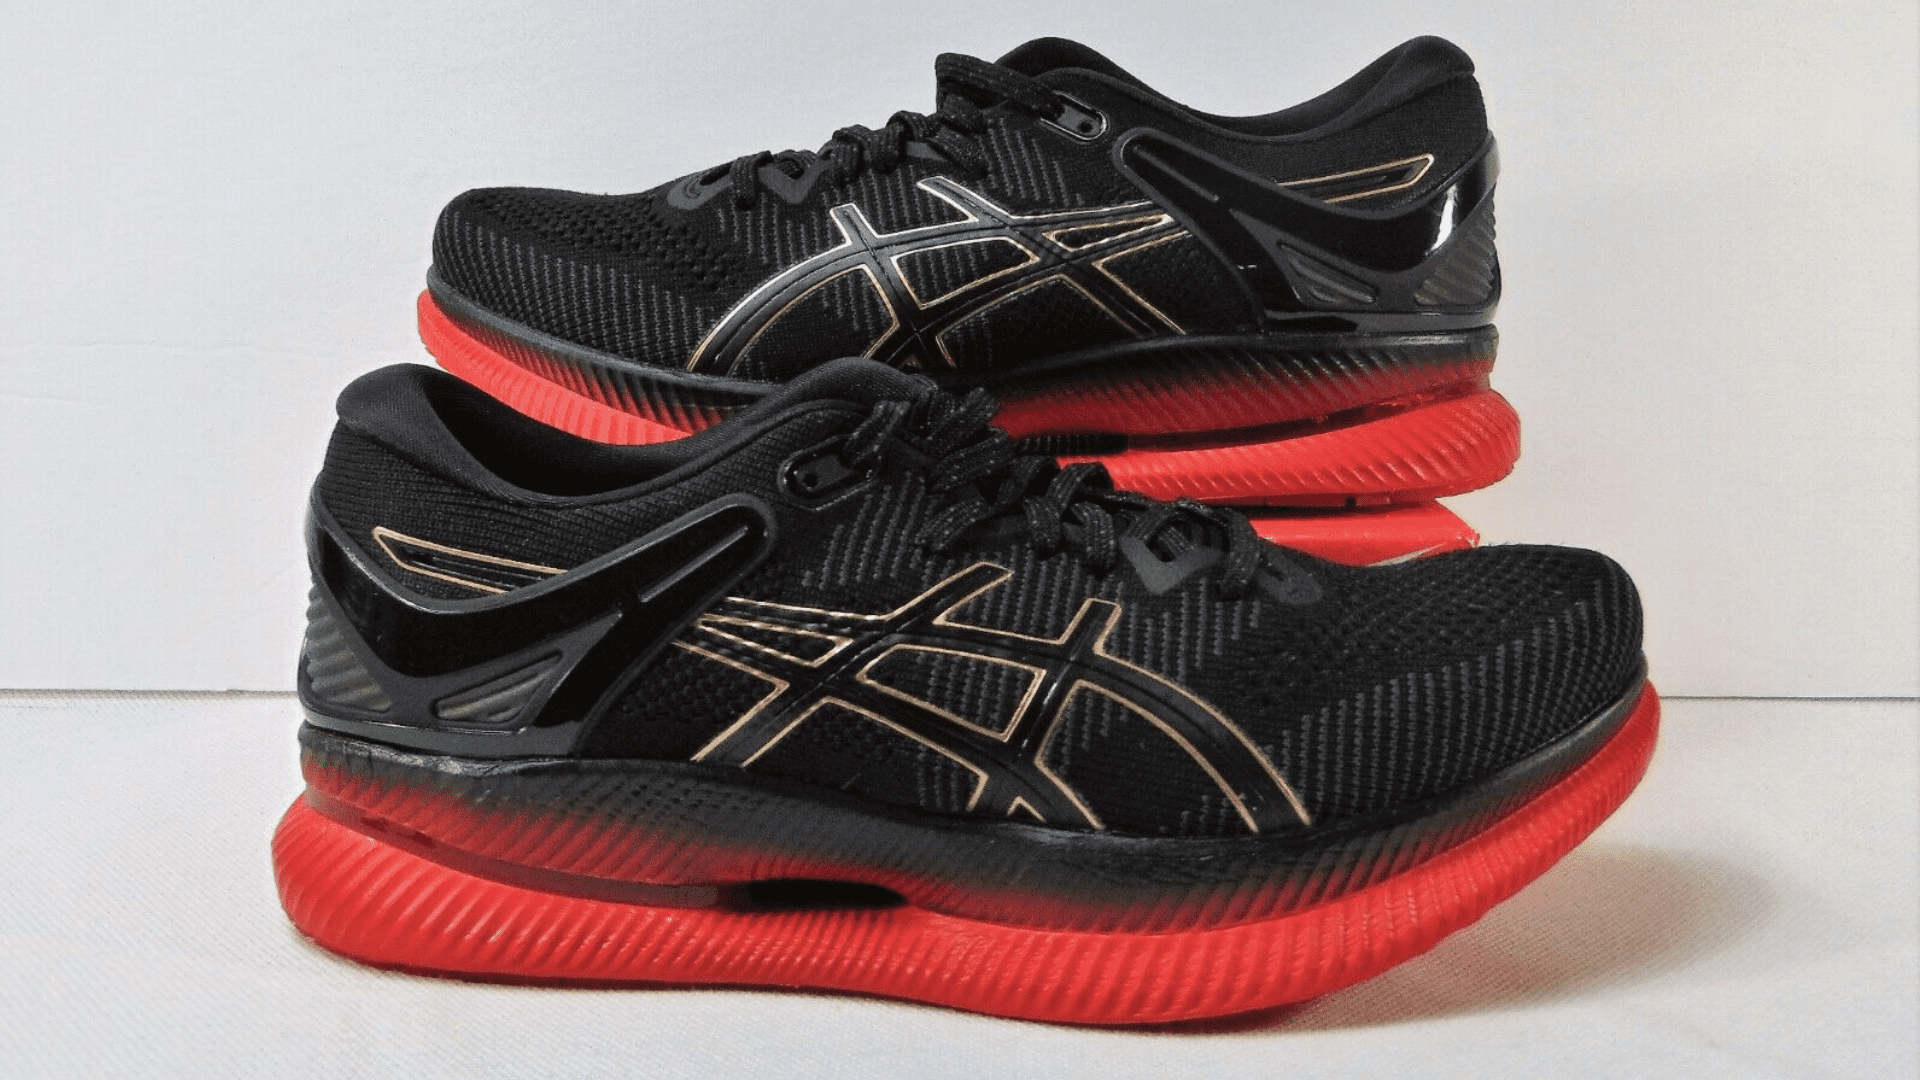 "A pair of Asics Metaride shoes designed with advanced cushioning technology, providing exceptional comfort and reducing the pain and discomfort associated with Morton's neuroma.